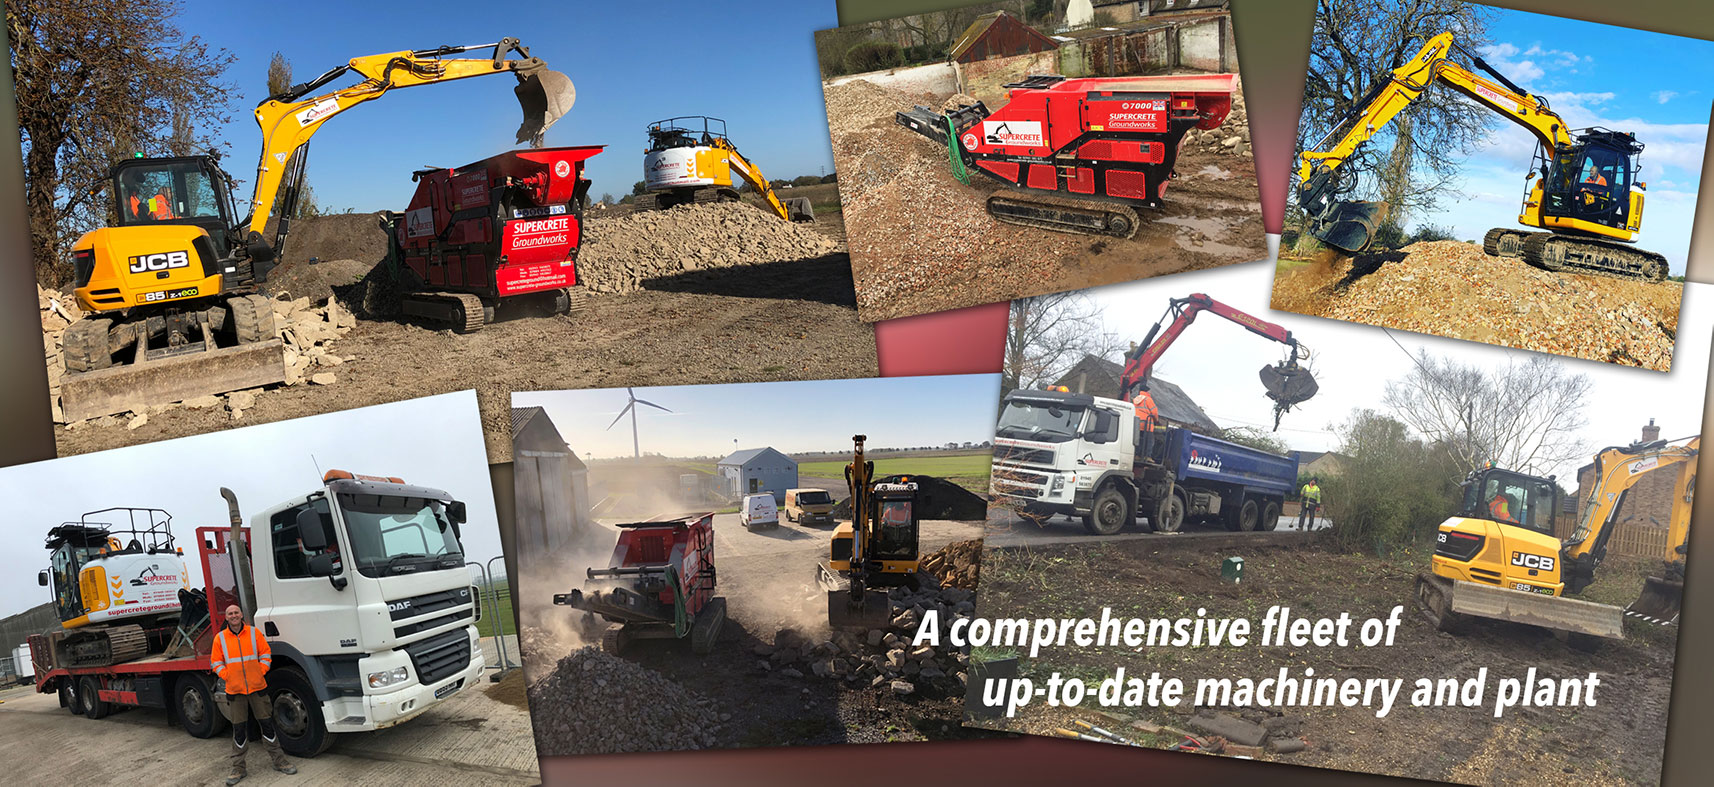 A comprehensive fleet of up-to-date machinery and plant